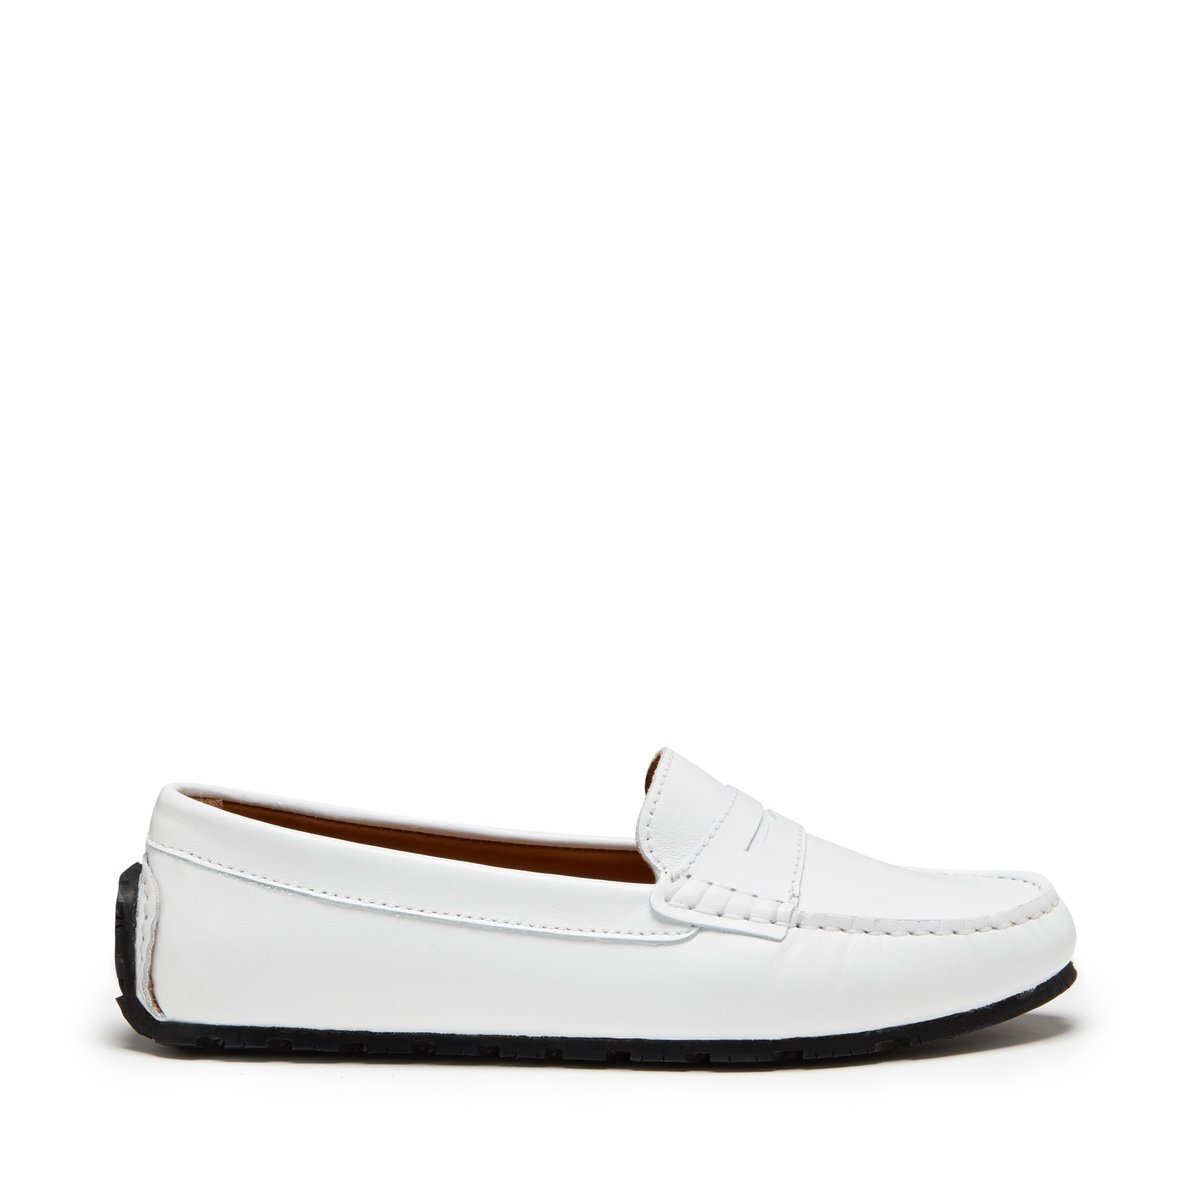 white leather moccasins womens